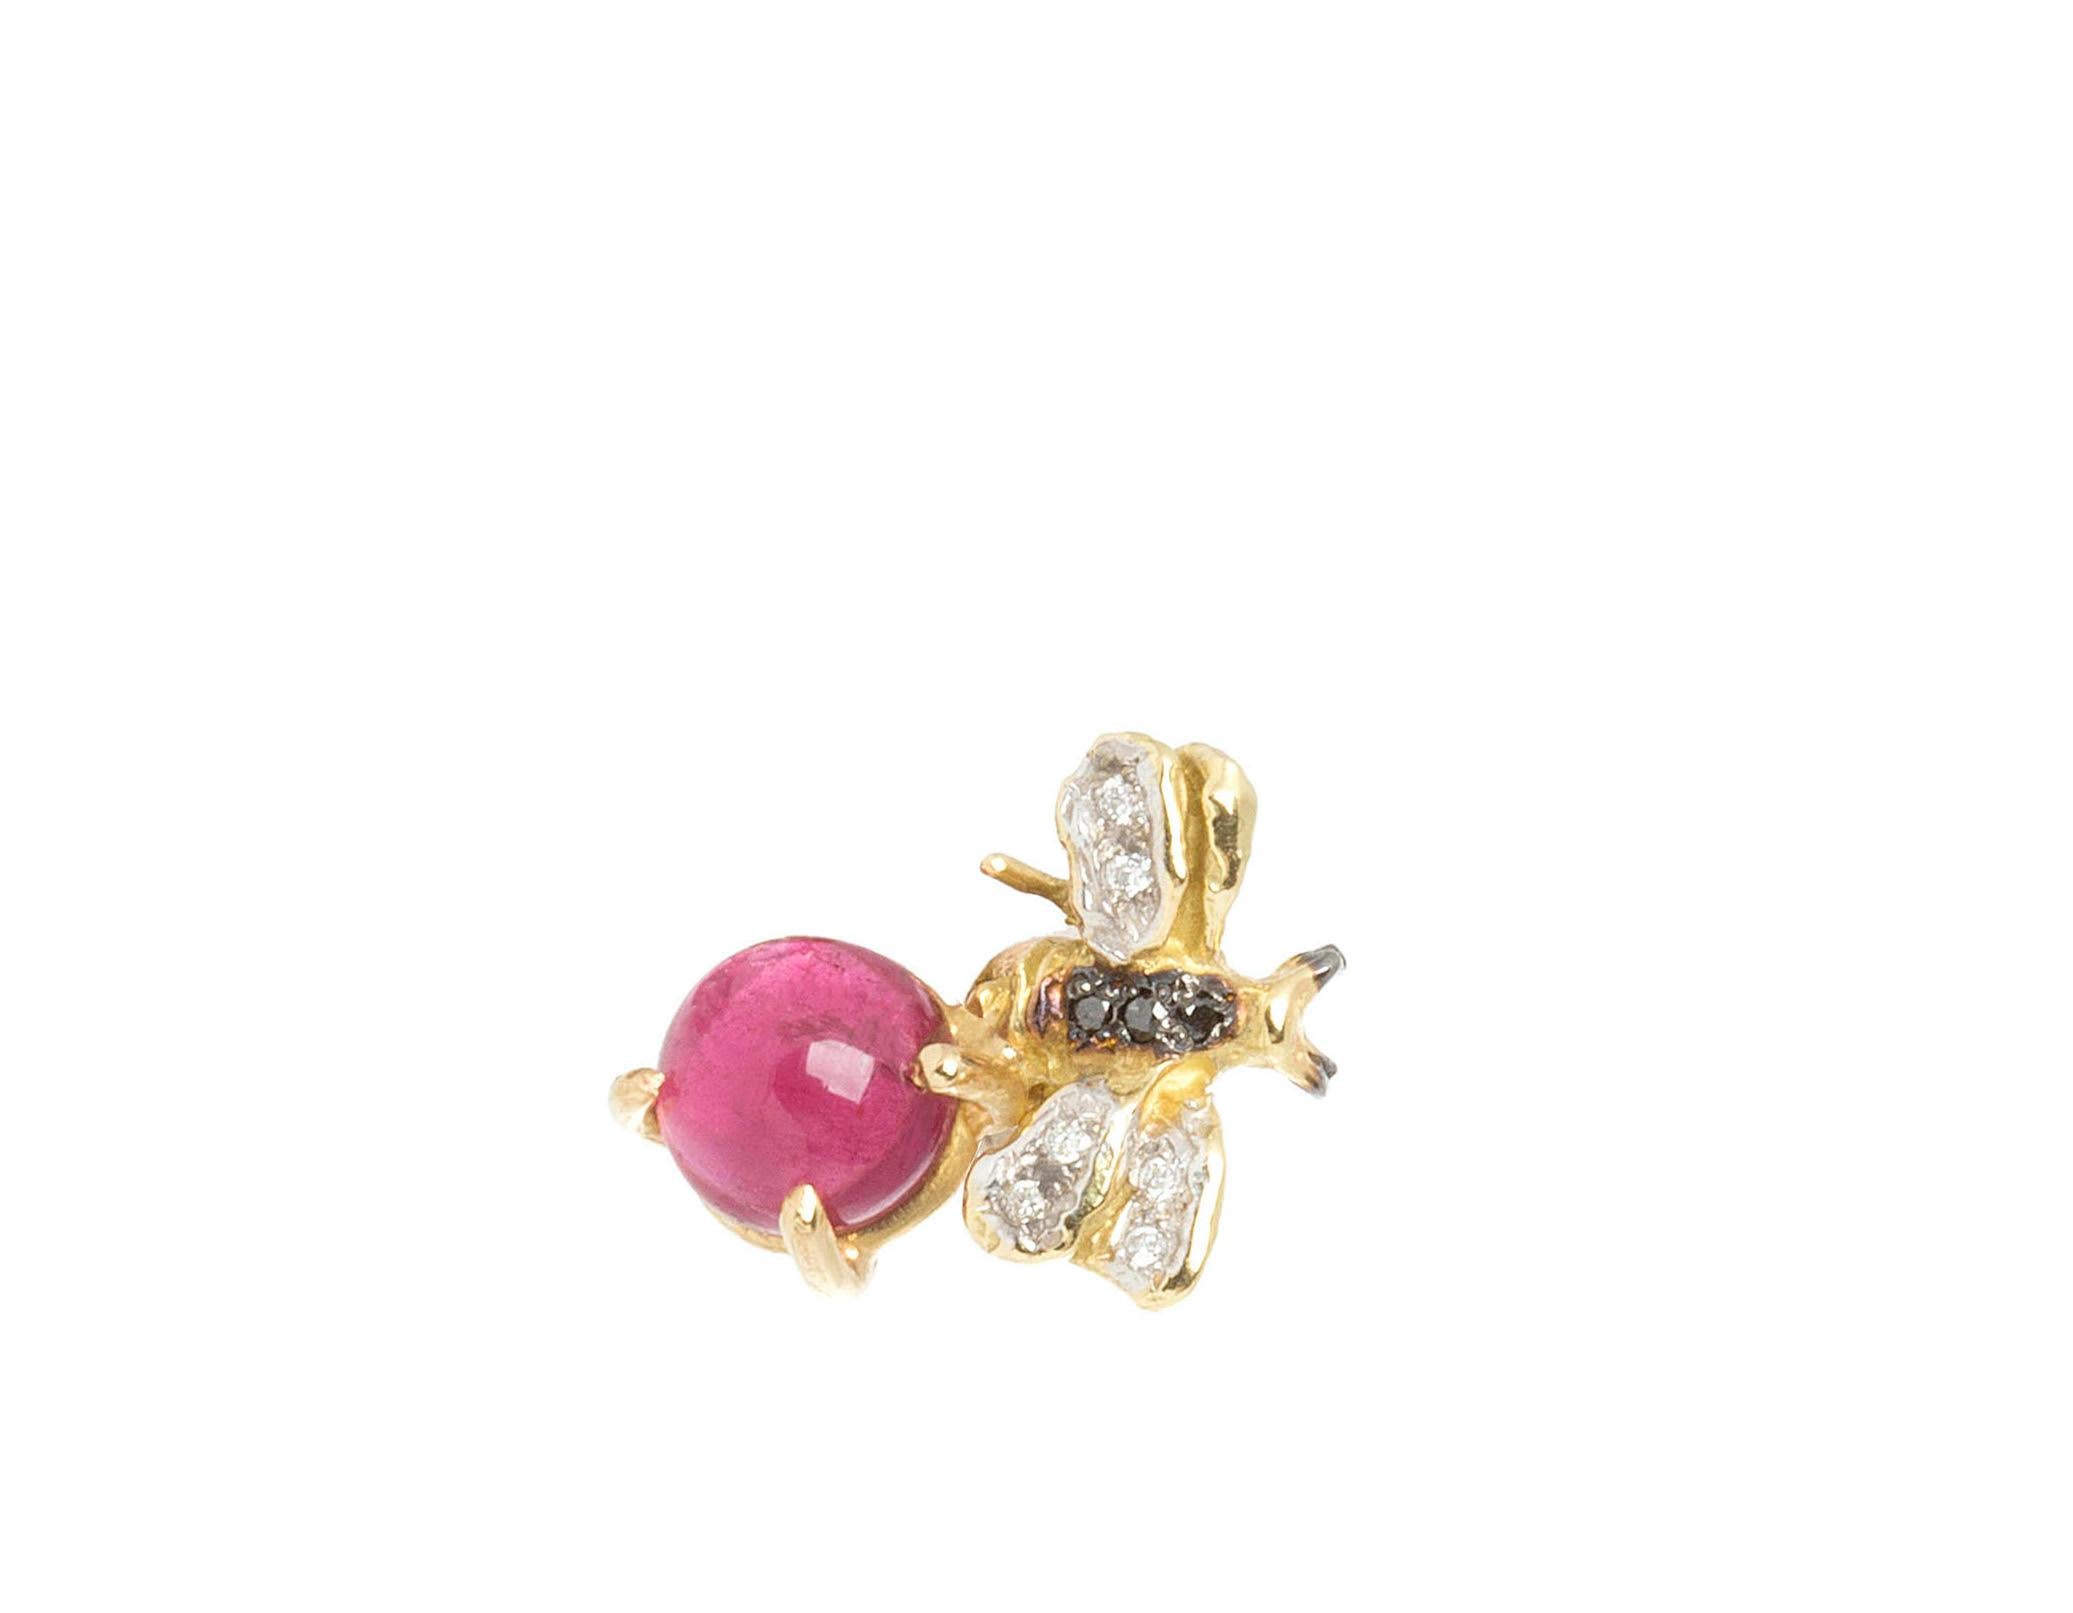 Rossella Ugolini 18K Gold 3.5 Kt Pink Tourmaline Diamonds Bees Stud Earrings In New Condition For Sale In Rome, IT